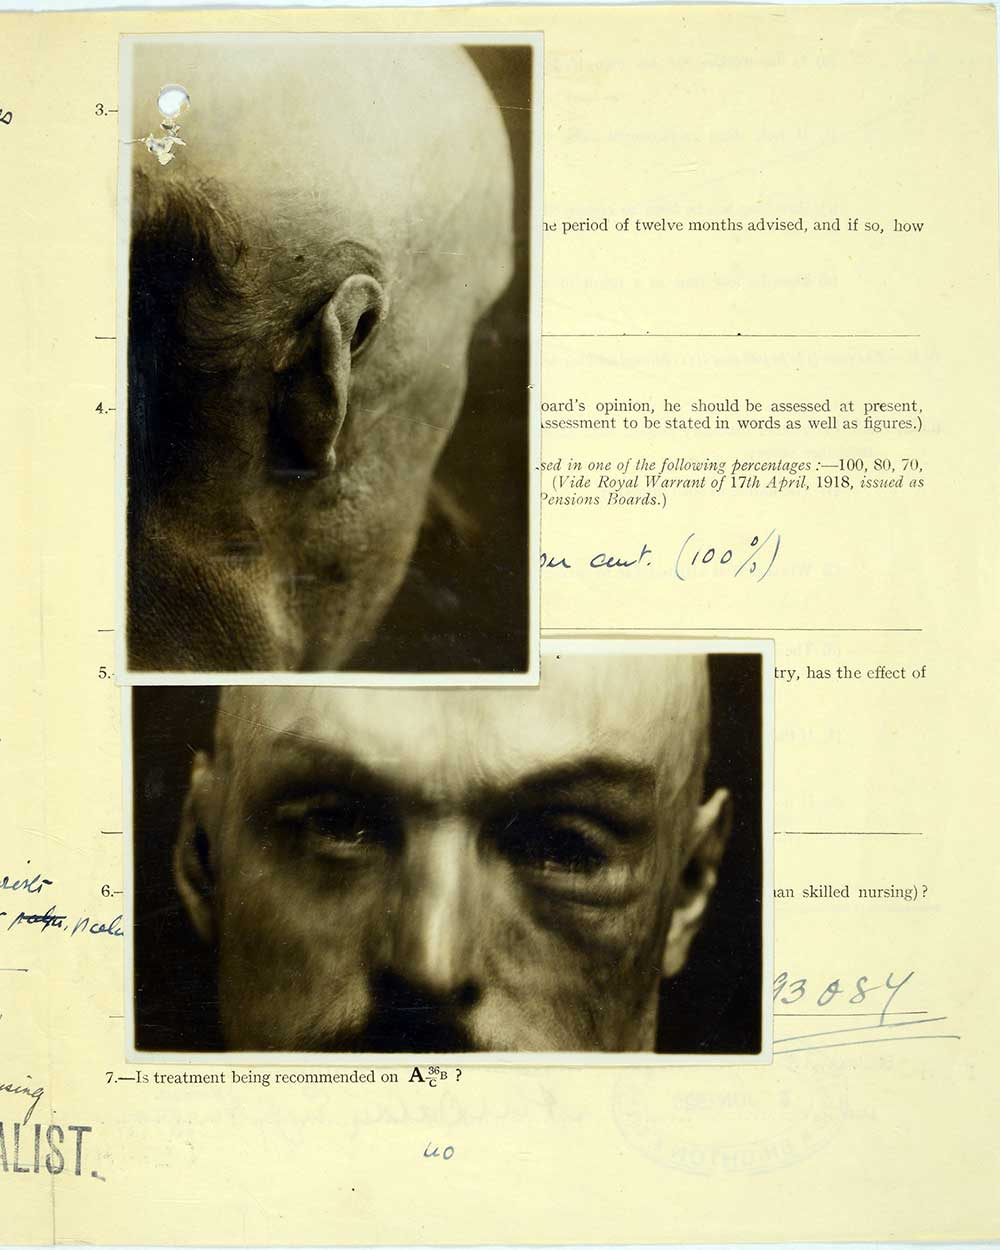 Image depicts the burn face and head of Rowland.